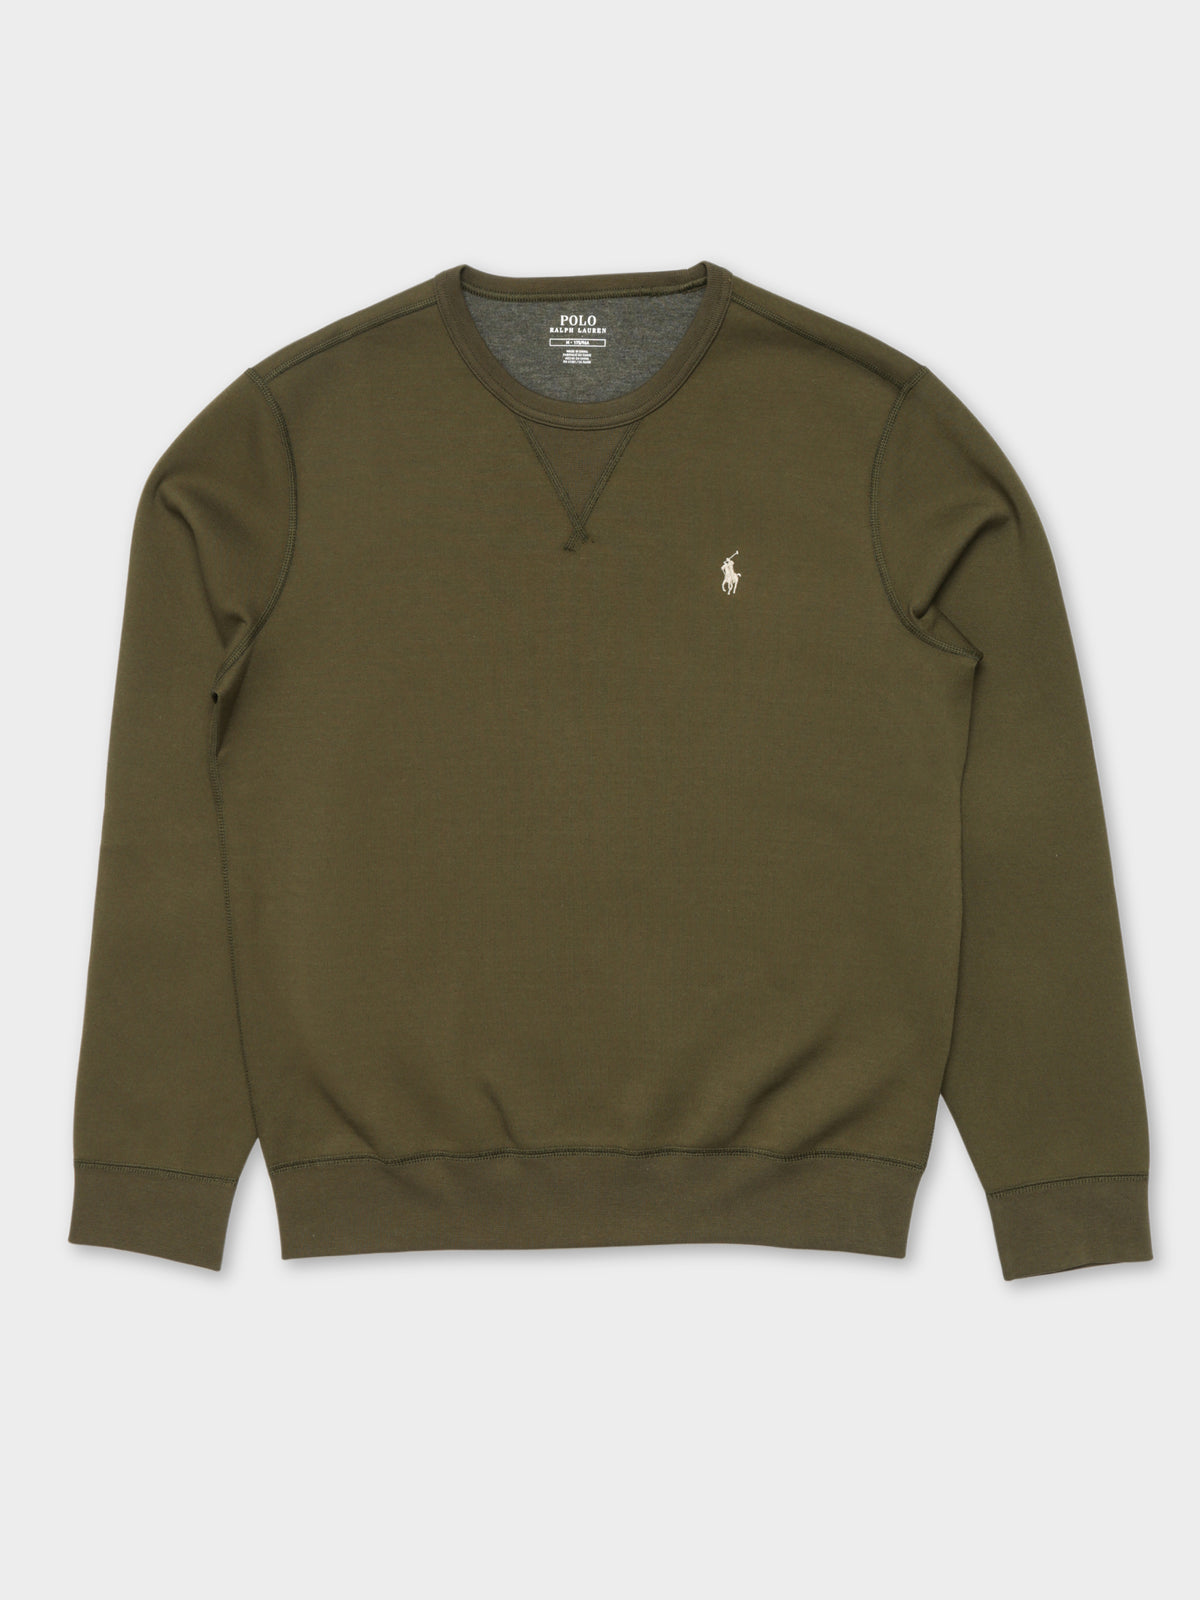 Long Sleeve Crew Sweater in Olive